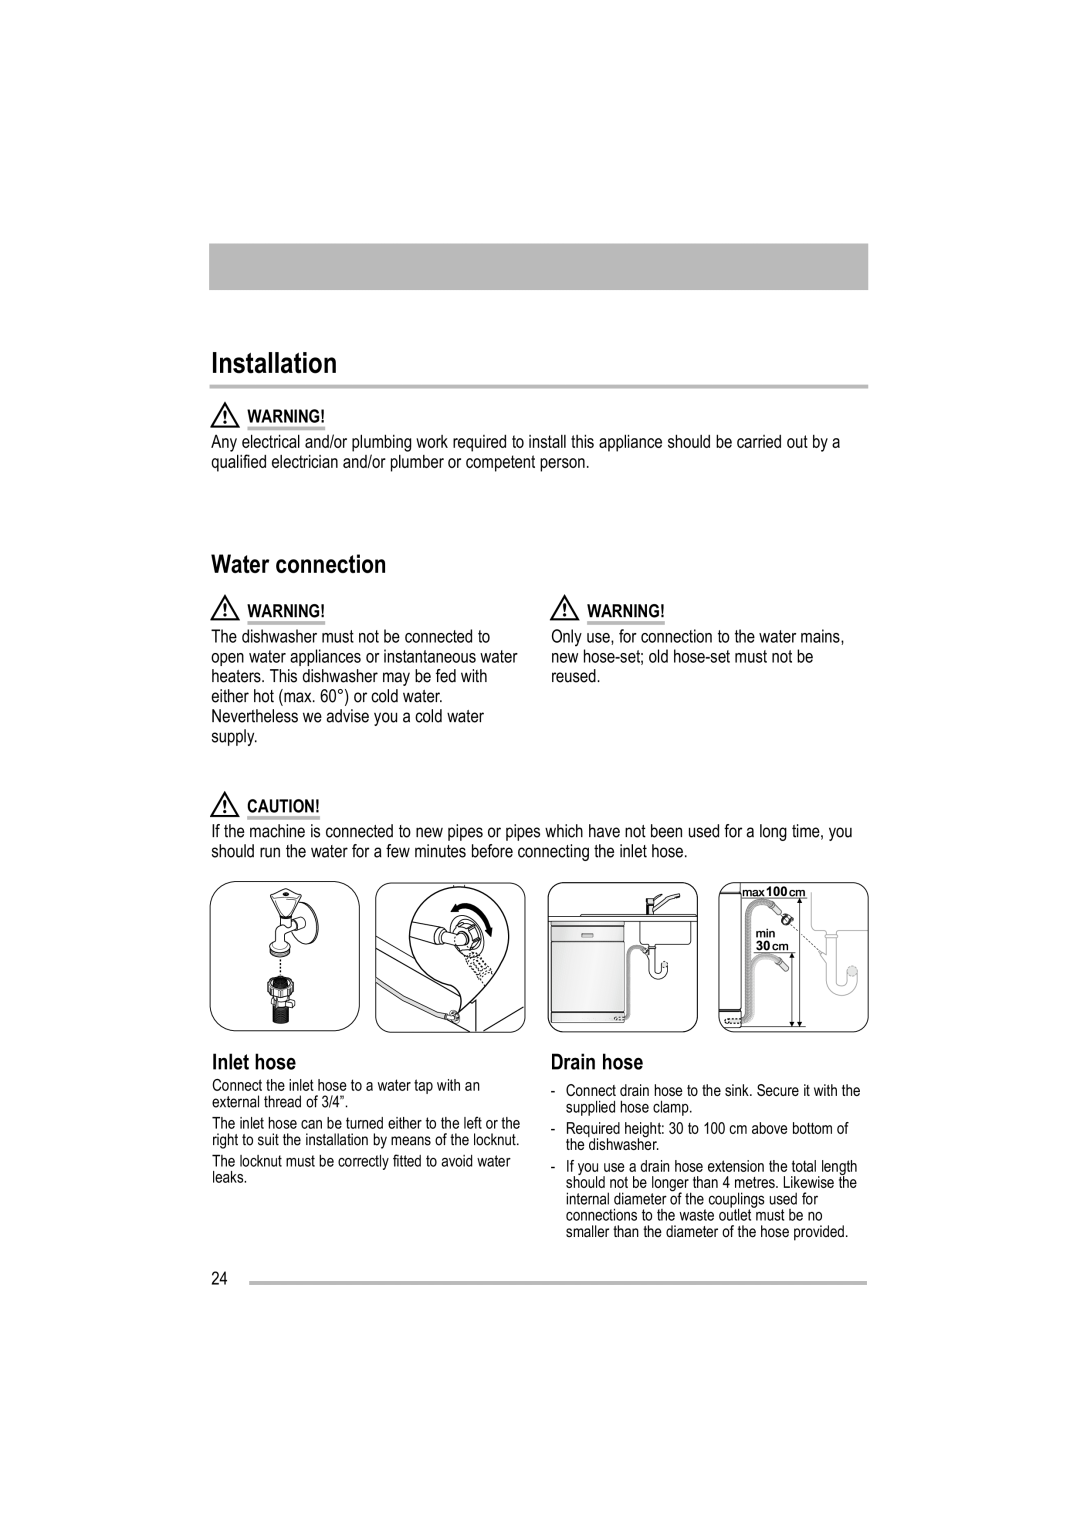 Electrolux ZDF 501 user manual Installation, Water connection, Inlet hose, Drain hose 